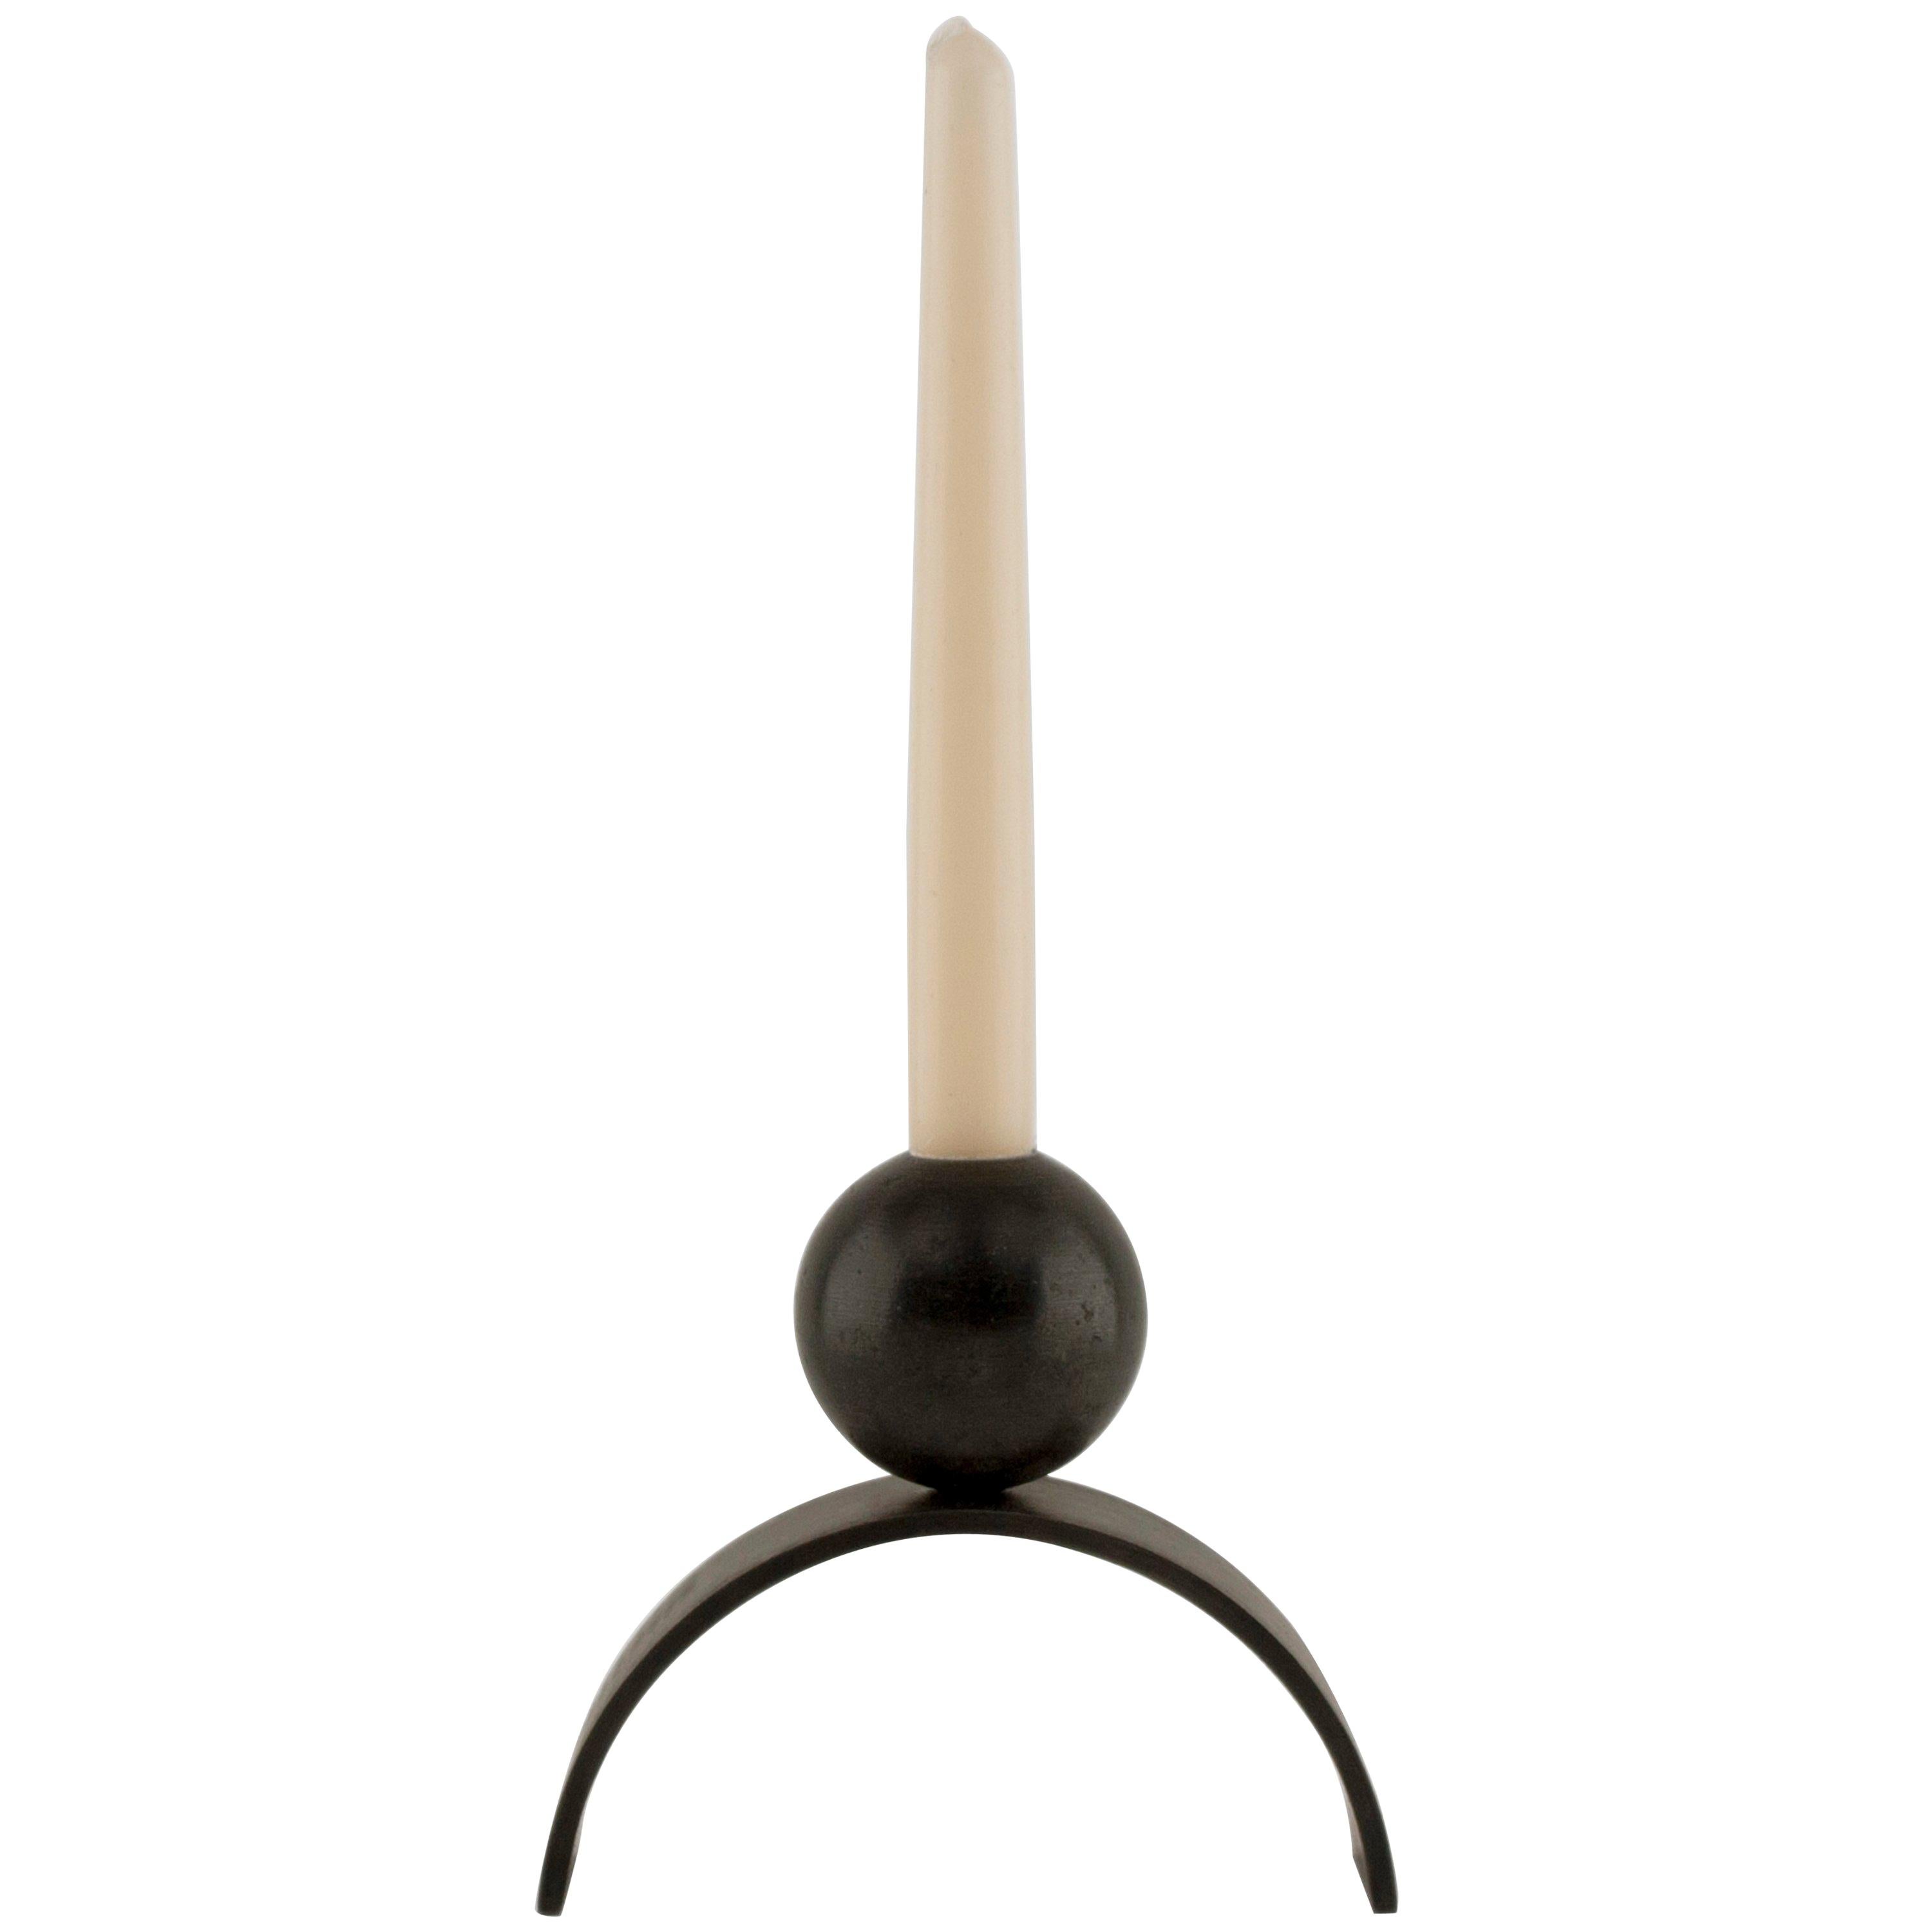 Contemporary Arch and Ball, Blackened Steel Candleholder, SET of 10